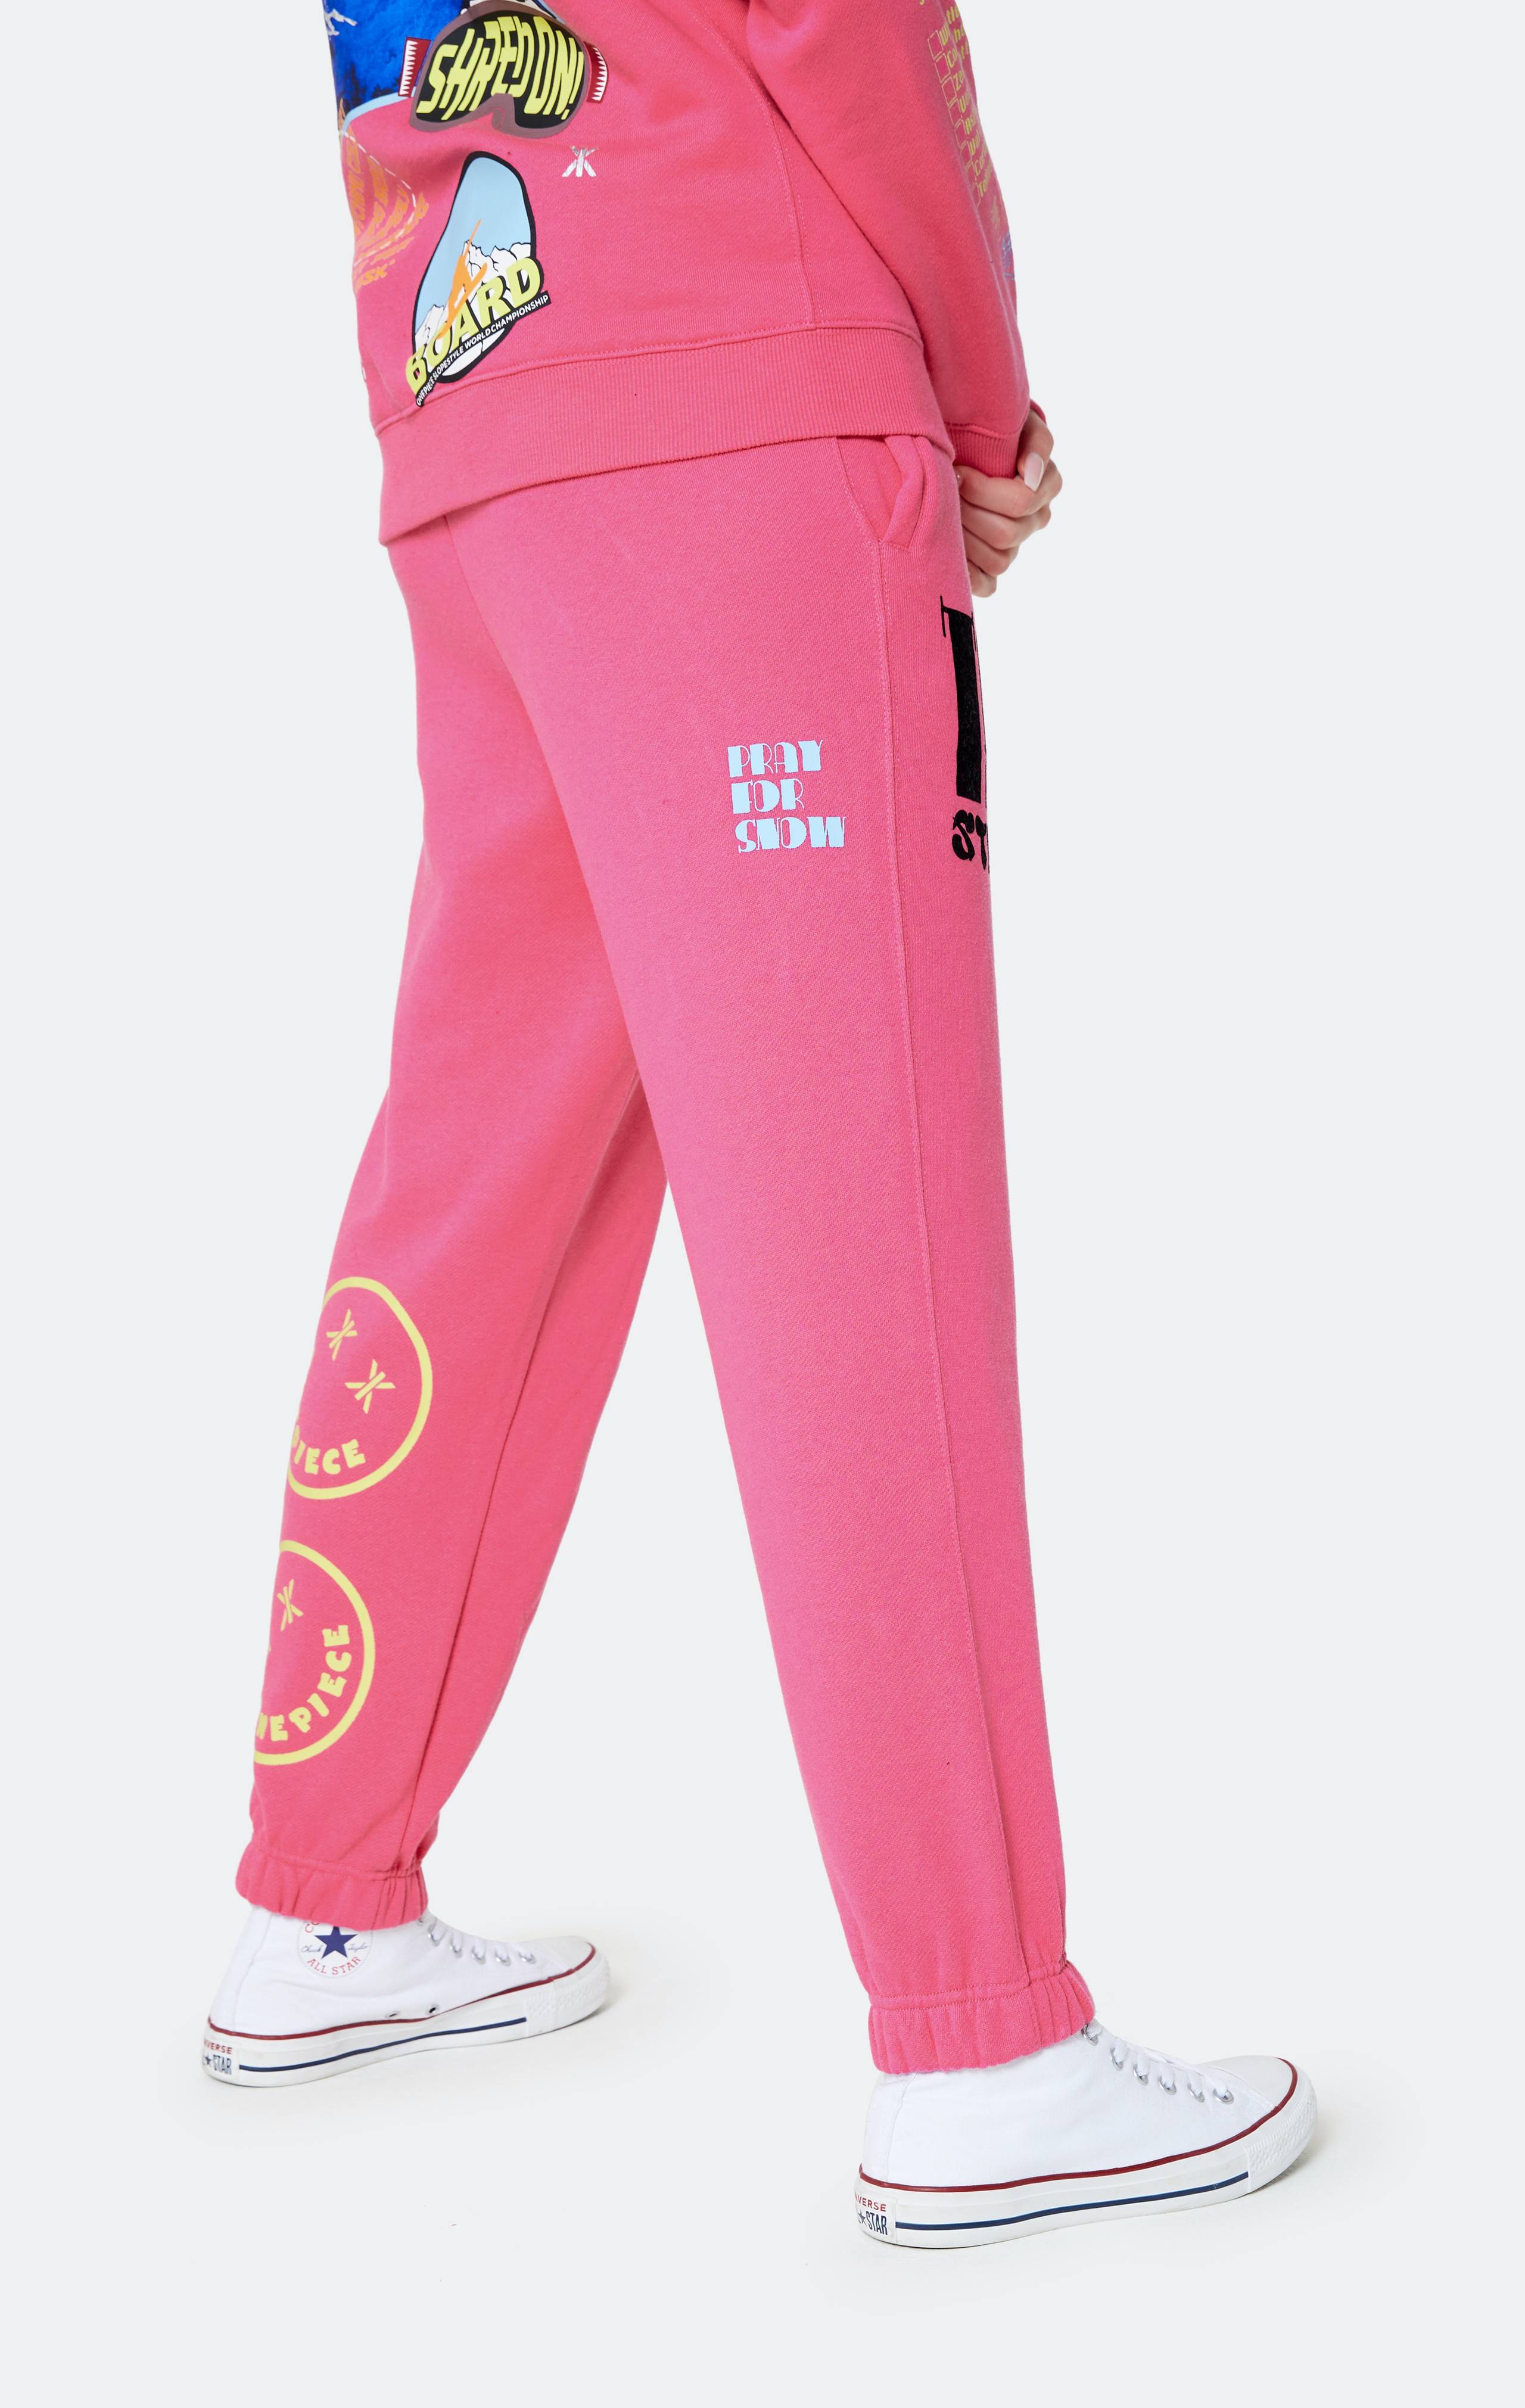 Onepiece Off Piste Pant Pink - 13